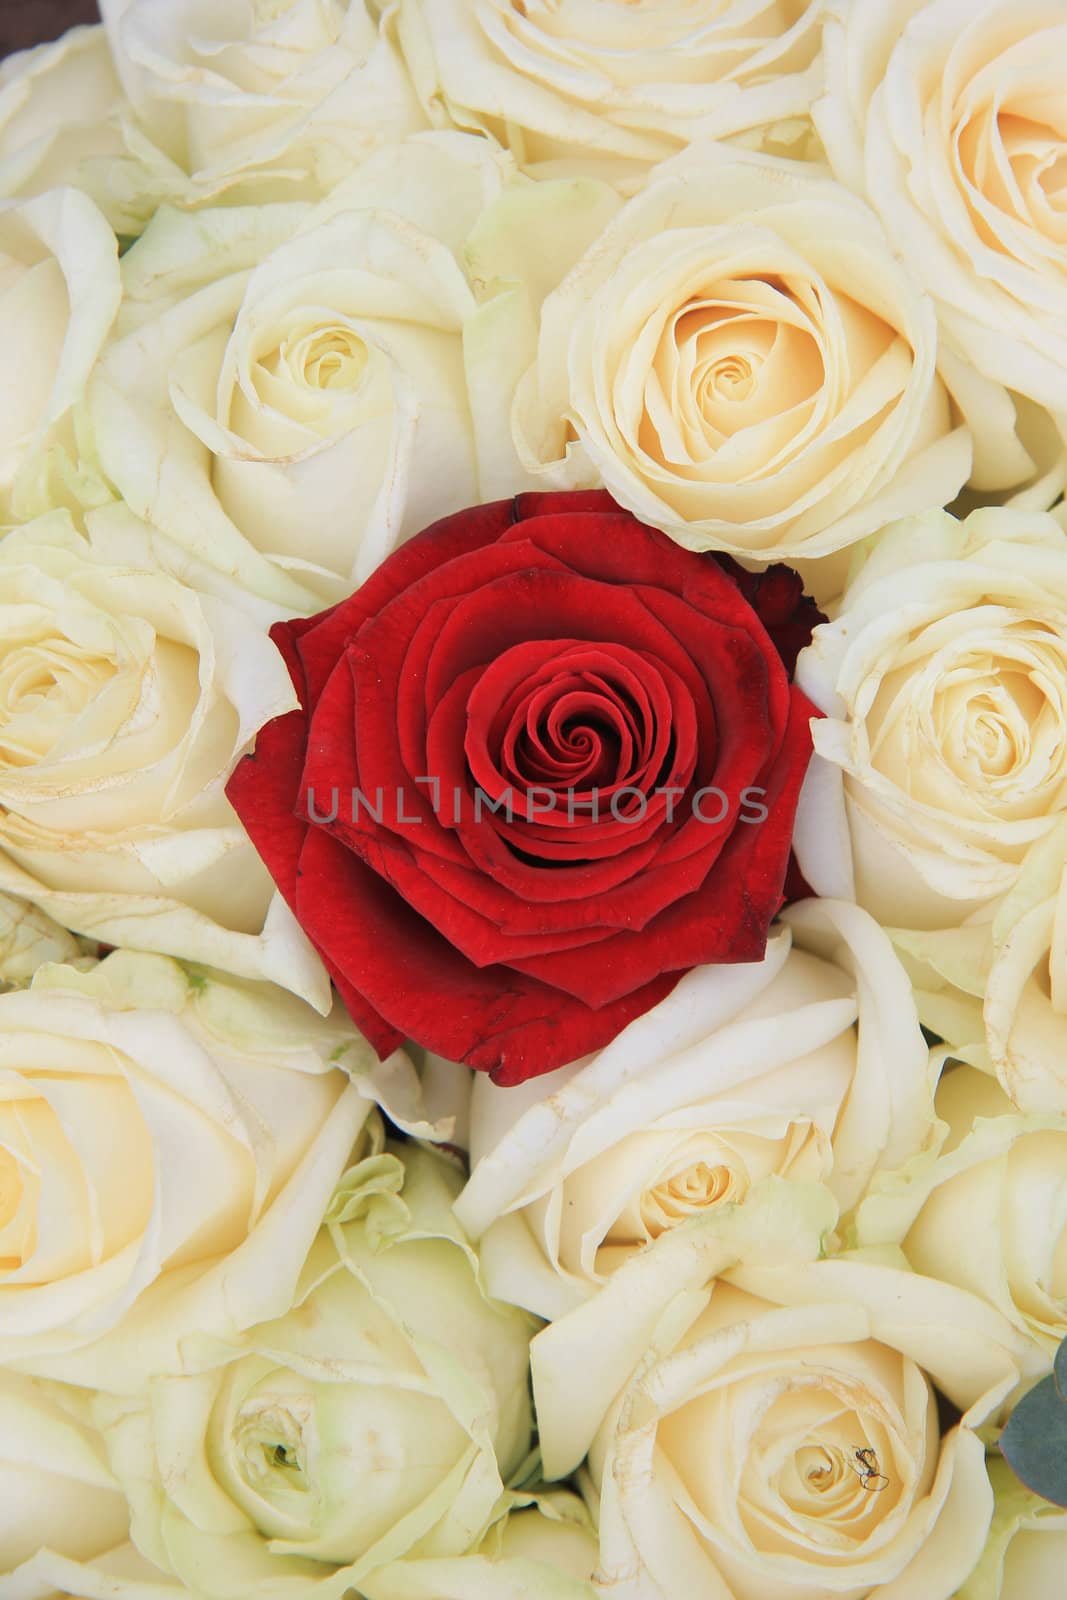 Red rose in a group of ivory white roses, part of bridal flower arrangement